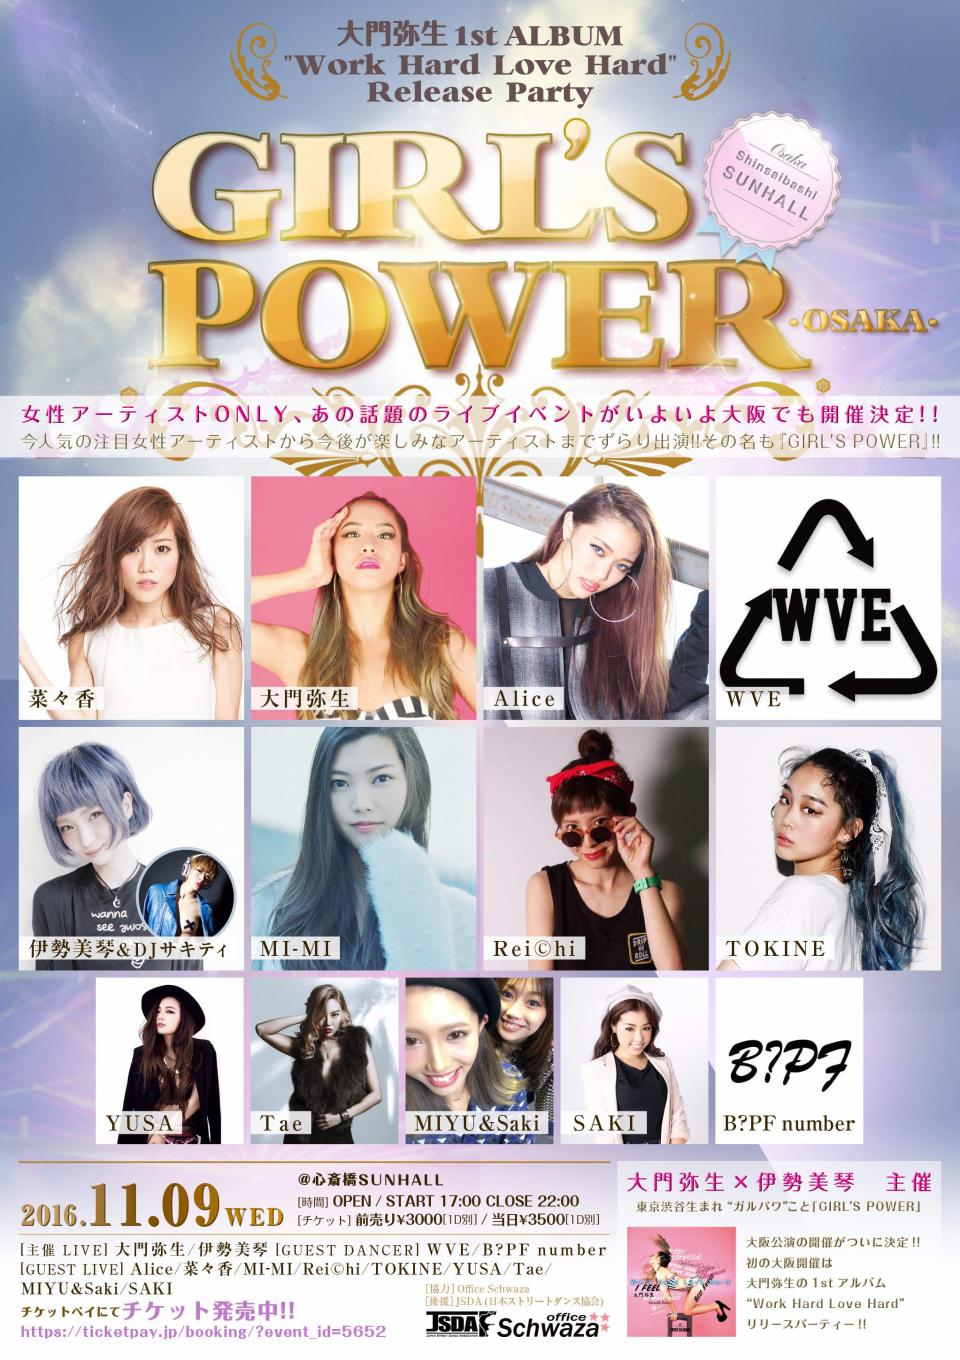 2016/11/9 ★Release Party GIRL'S POWER -OSAKA- ★